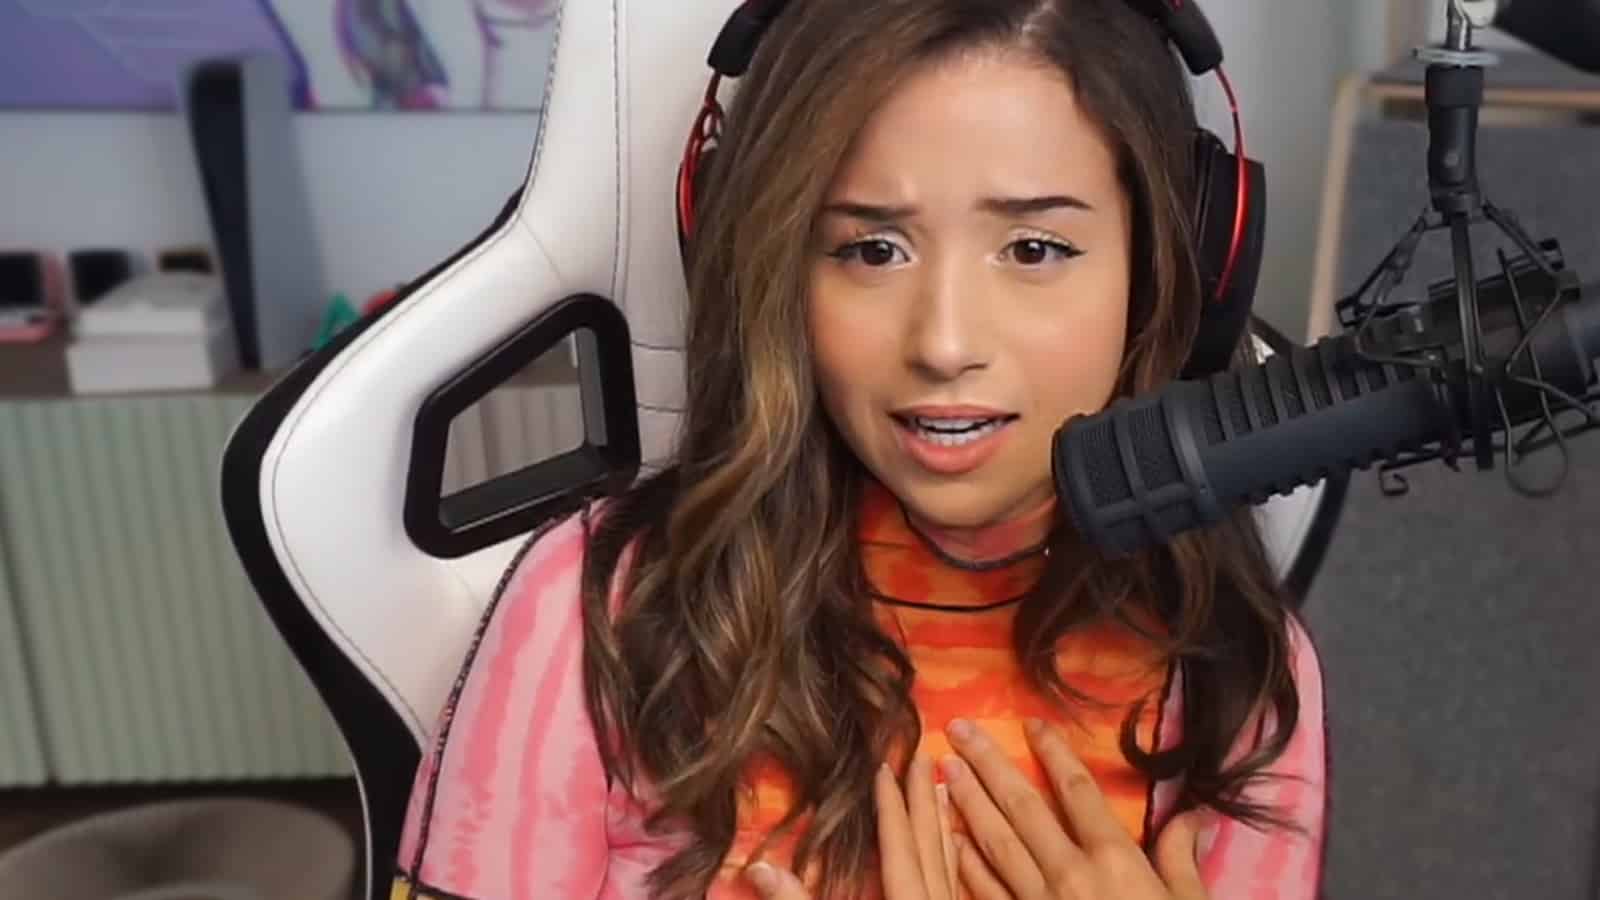 Minecraft with Poki, this was an experience chat told me I COULD., By  Pokimane